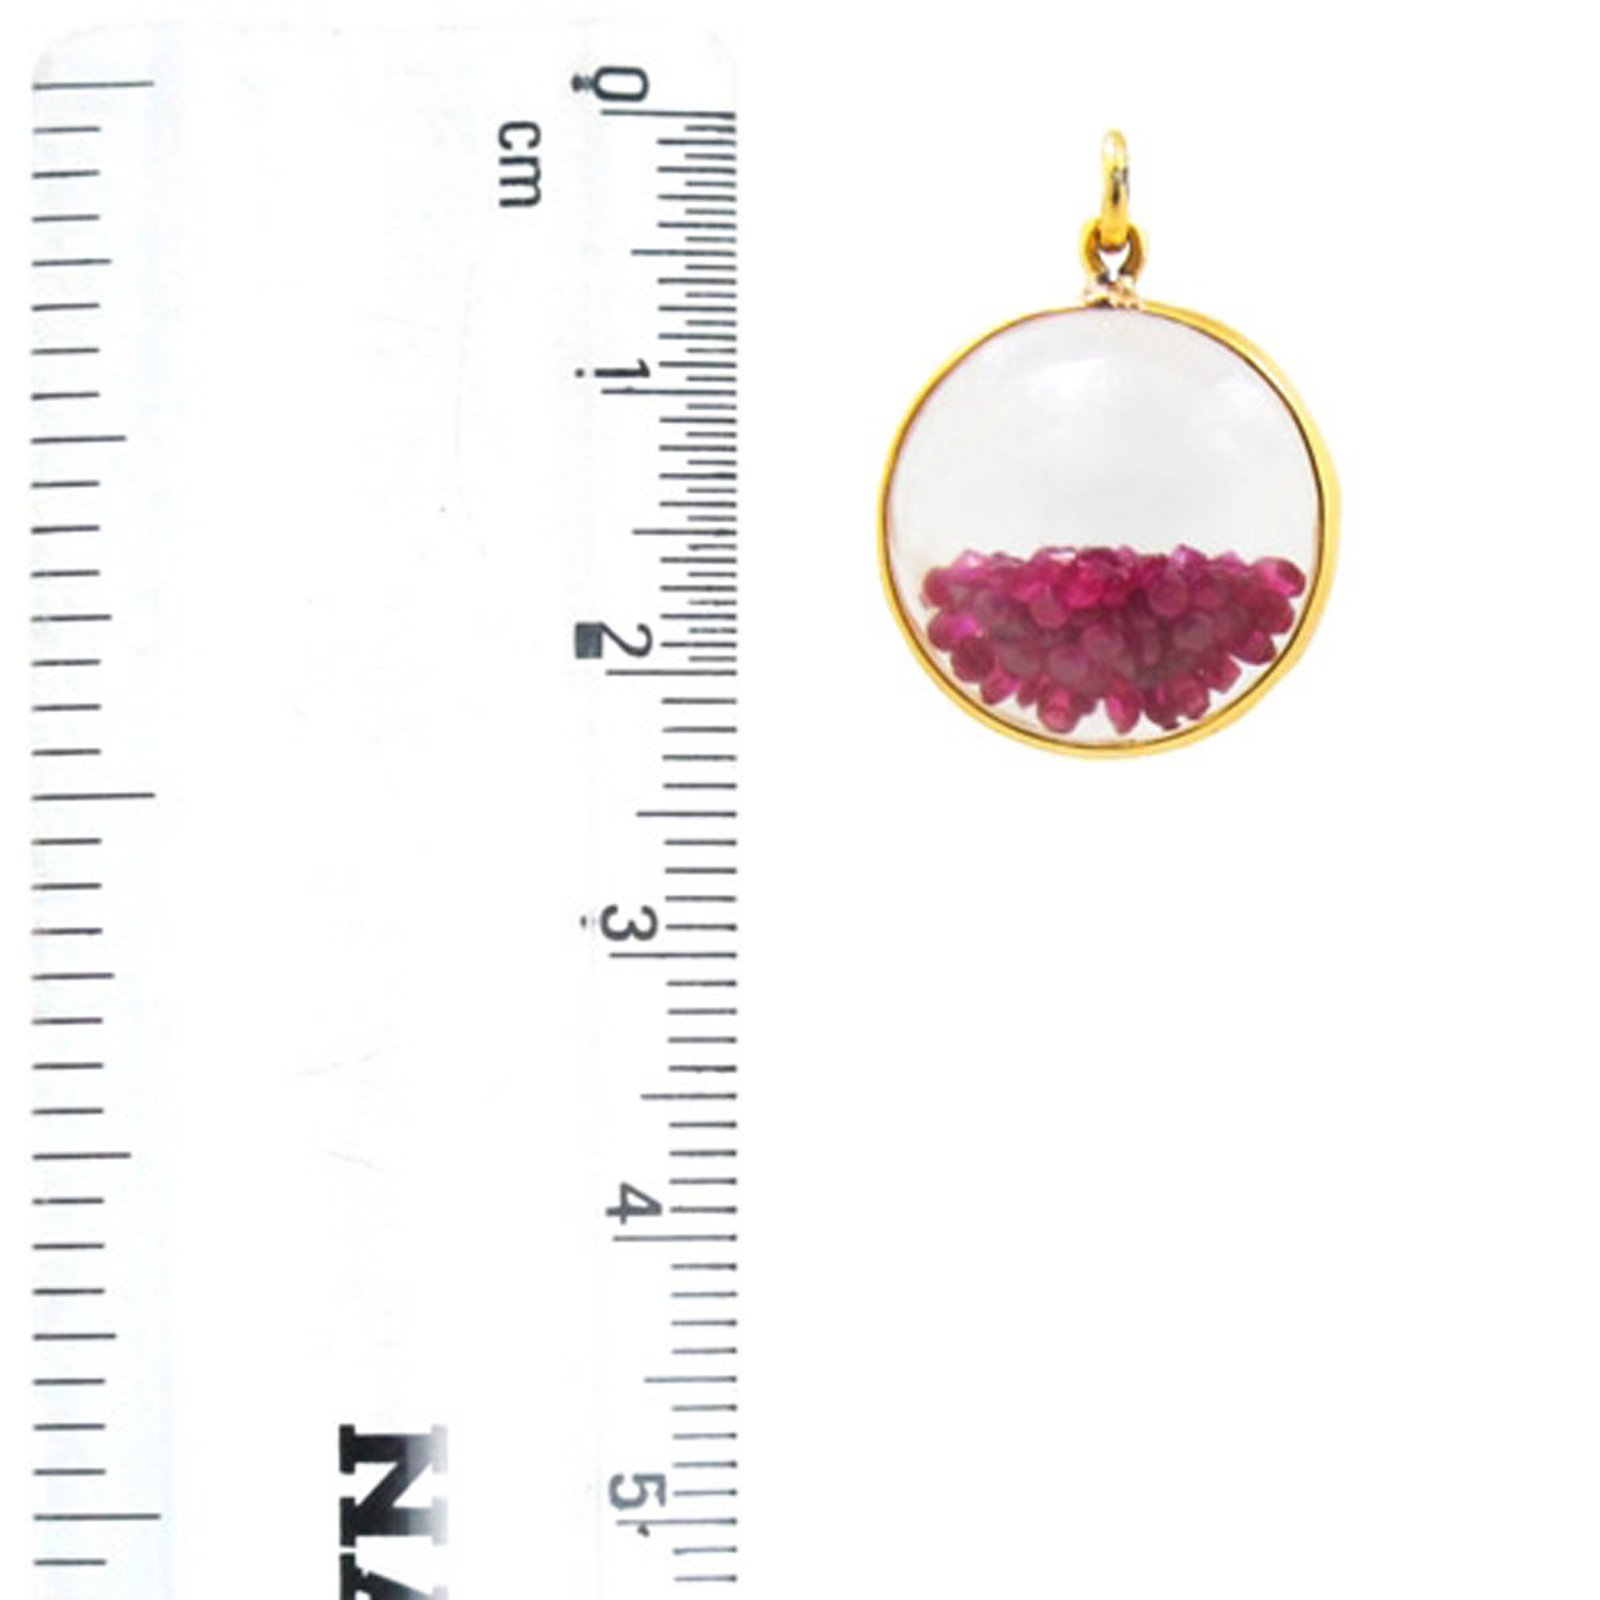 14k solid gold crystal shaker pendant with loose ruby